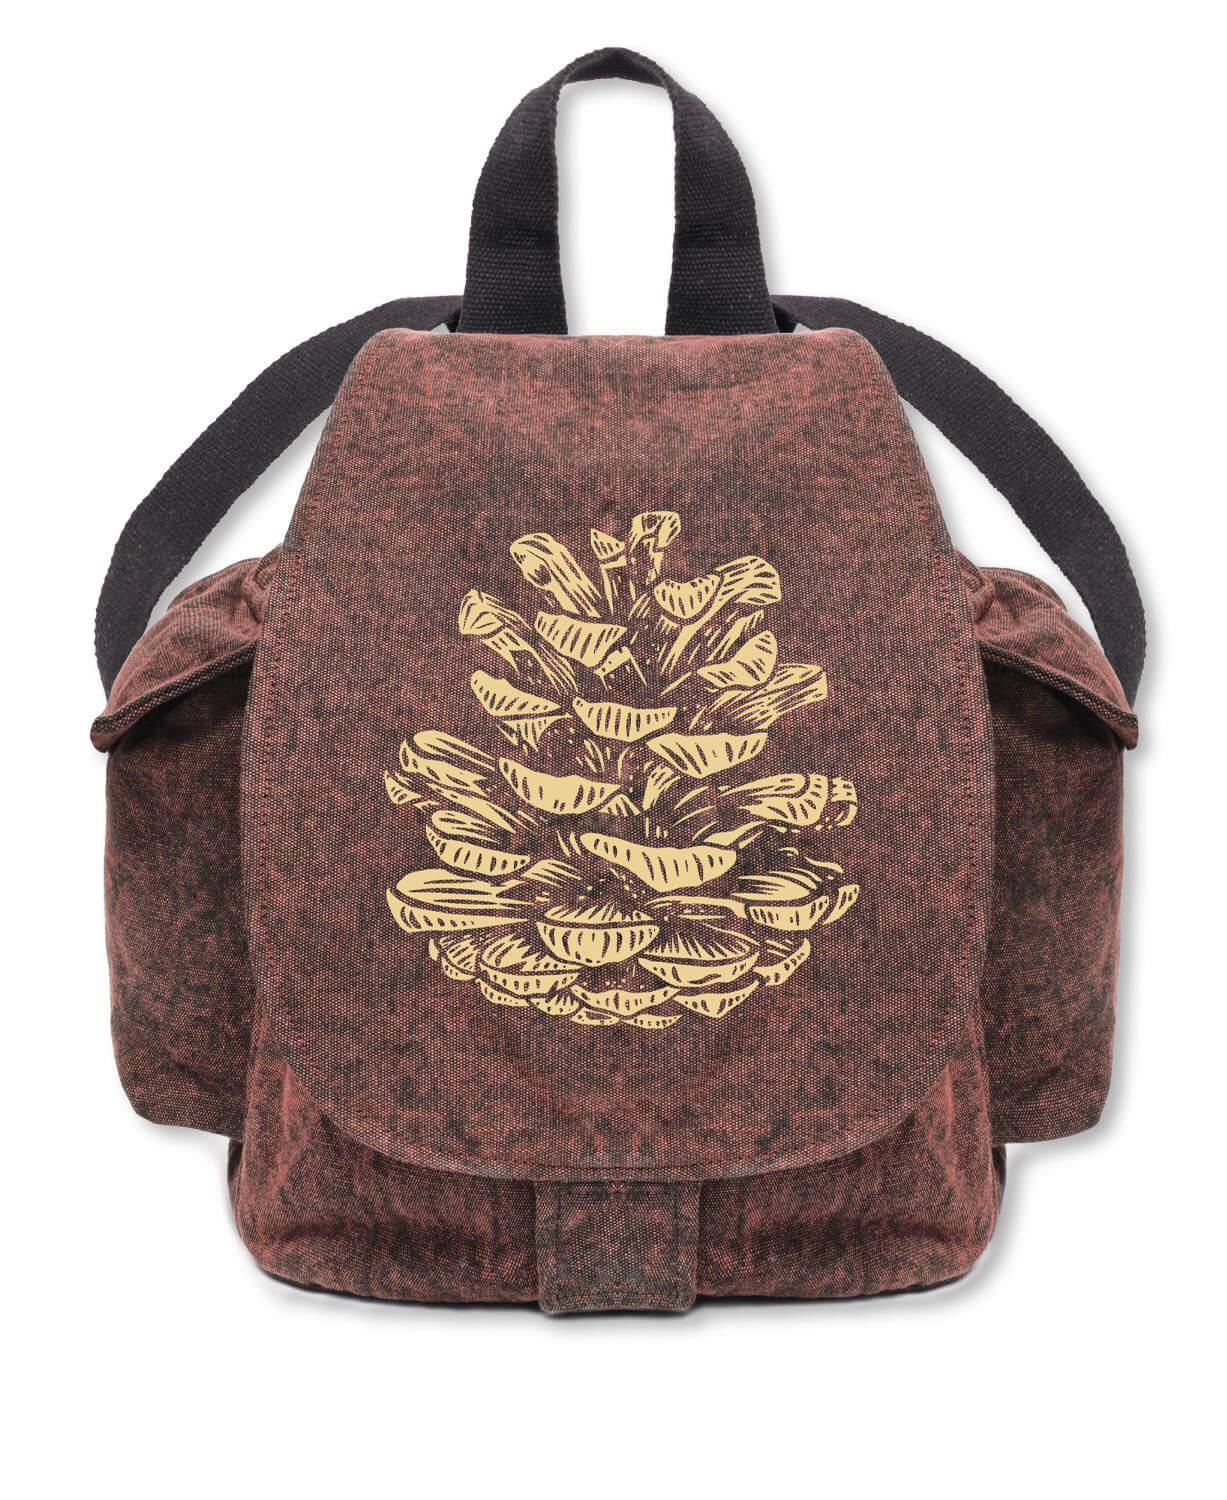 NEW! Pinecone Slouchy Backpack